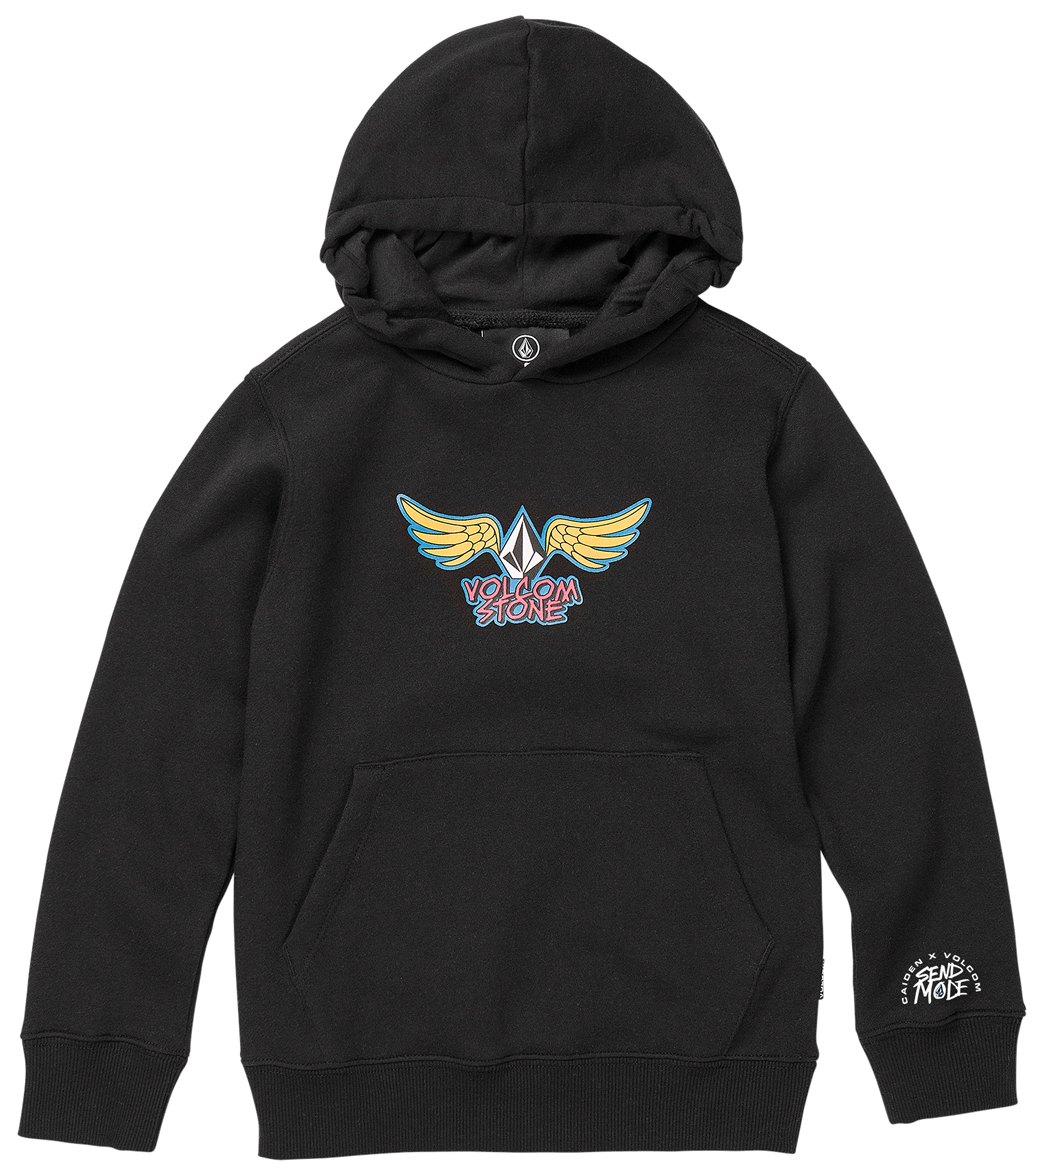 Volcom Boys' Caiden Pullover Hoodie Toddler - Black 2T Cotton/Polyester - Swimoutlet.com